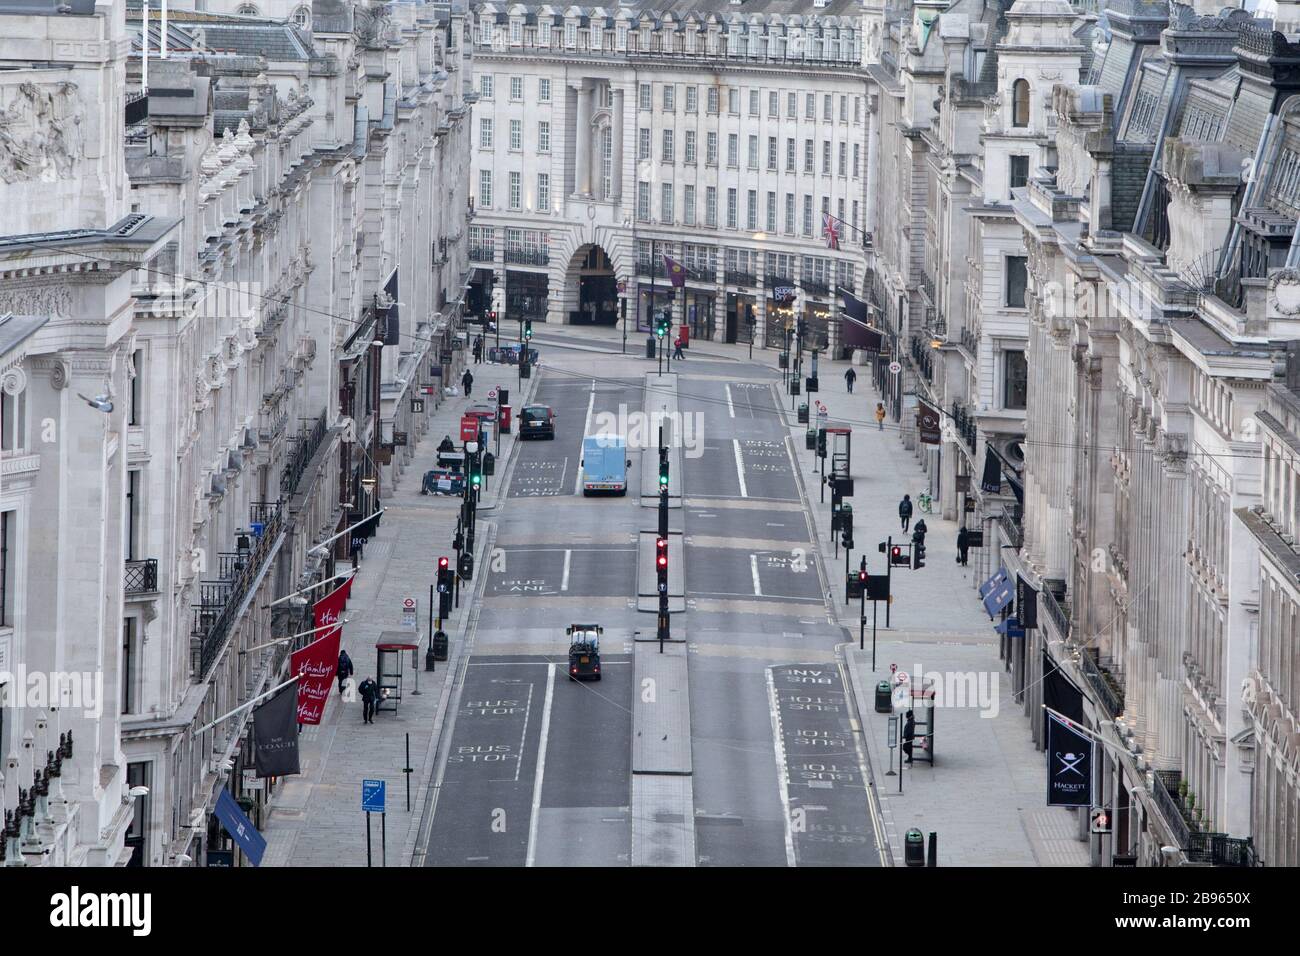 Regent Street Resembling A Ghost Town Amidst Coronavirus Outbreak. Views  captured from the roof of Asics on Oxford Circus show a deserted Regent  Street at 9.30 this morning. Normally a hive of